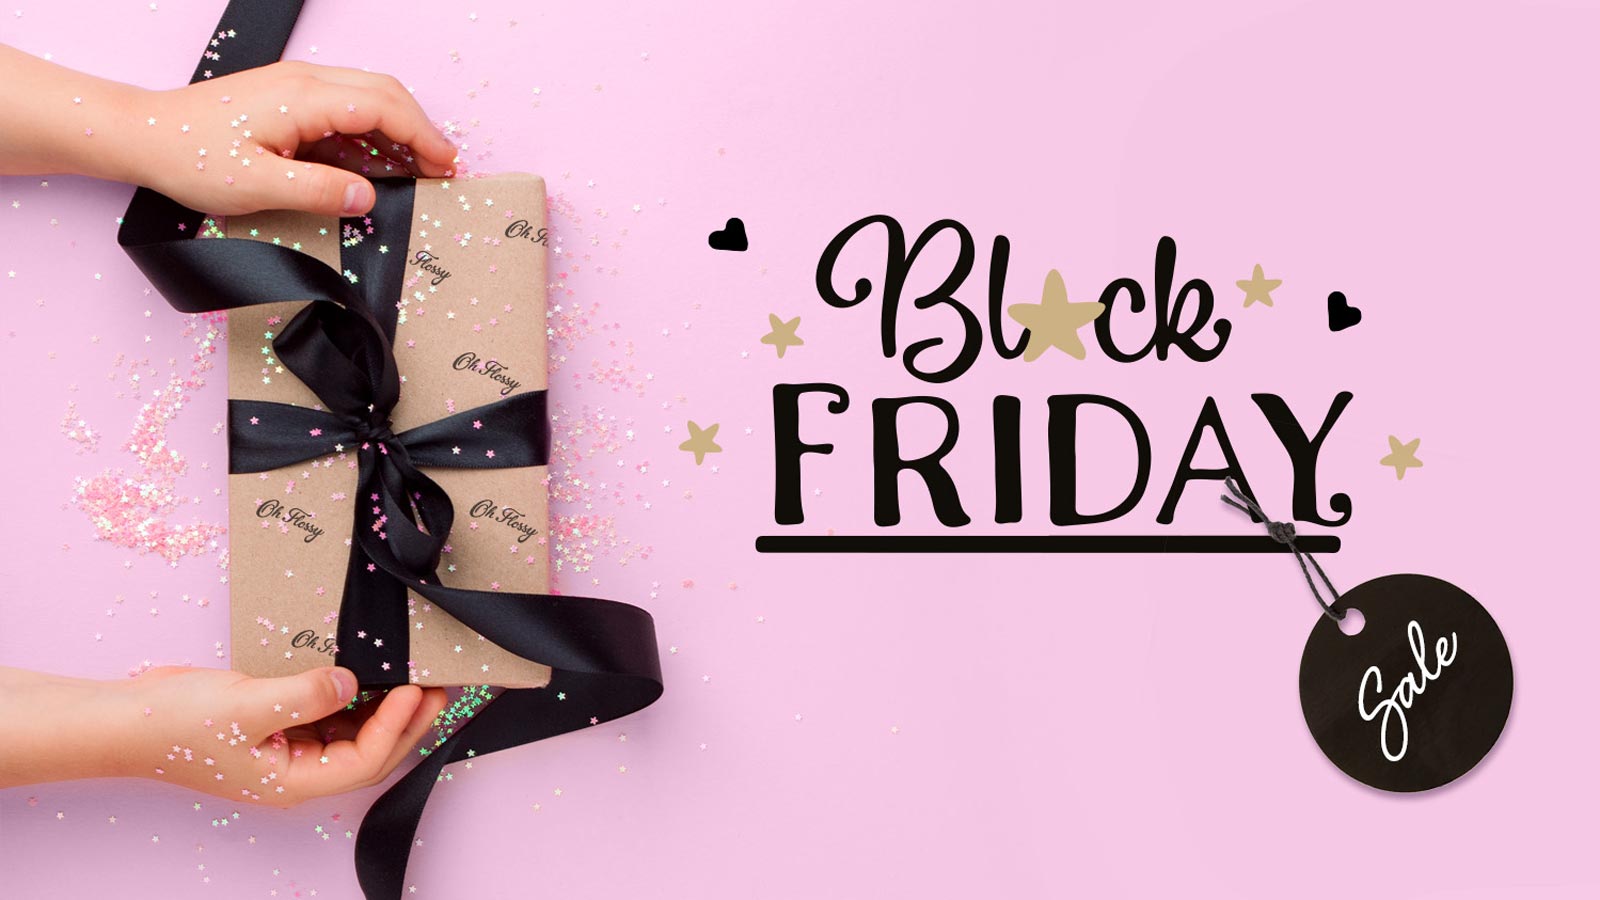 6 of our favourite independent brands offering AMAZING Black Friday deals 